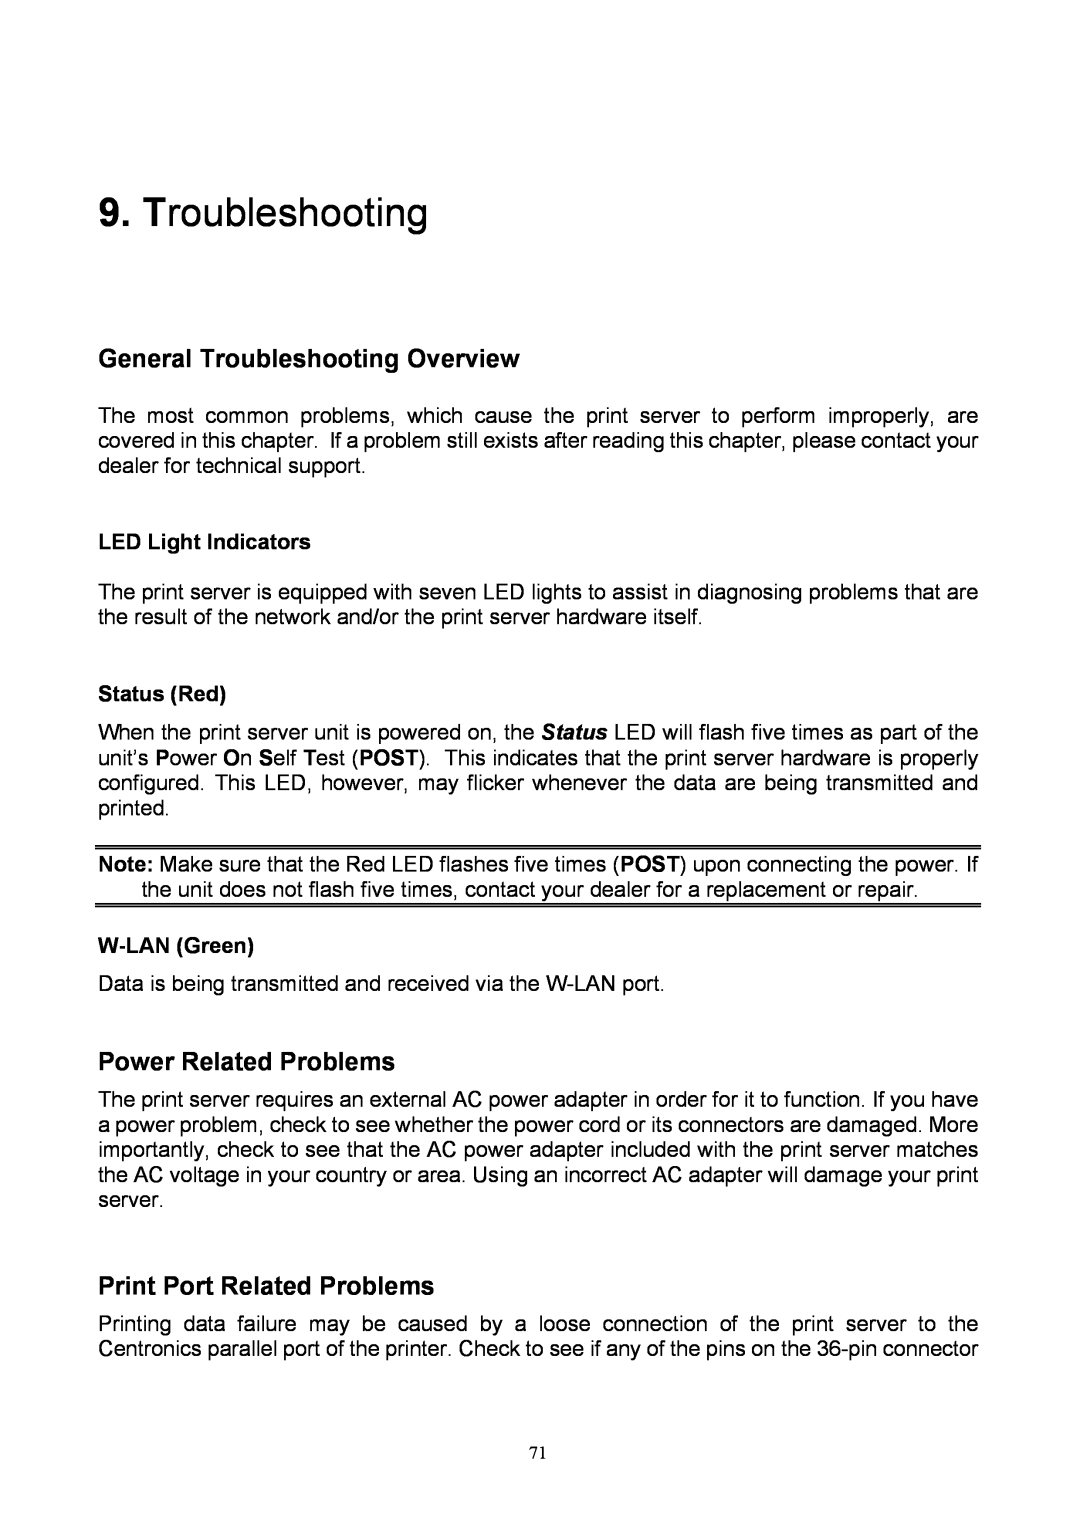 TRENDnet TEW-P1P General Troubleshooting Overview, Power Related Problems, Print Port Related Problems, Status Red 